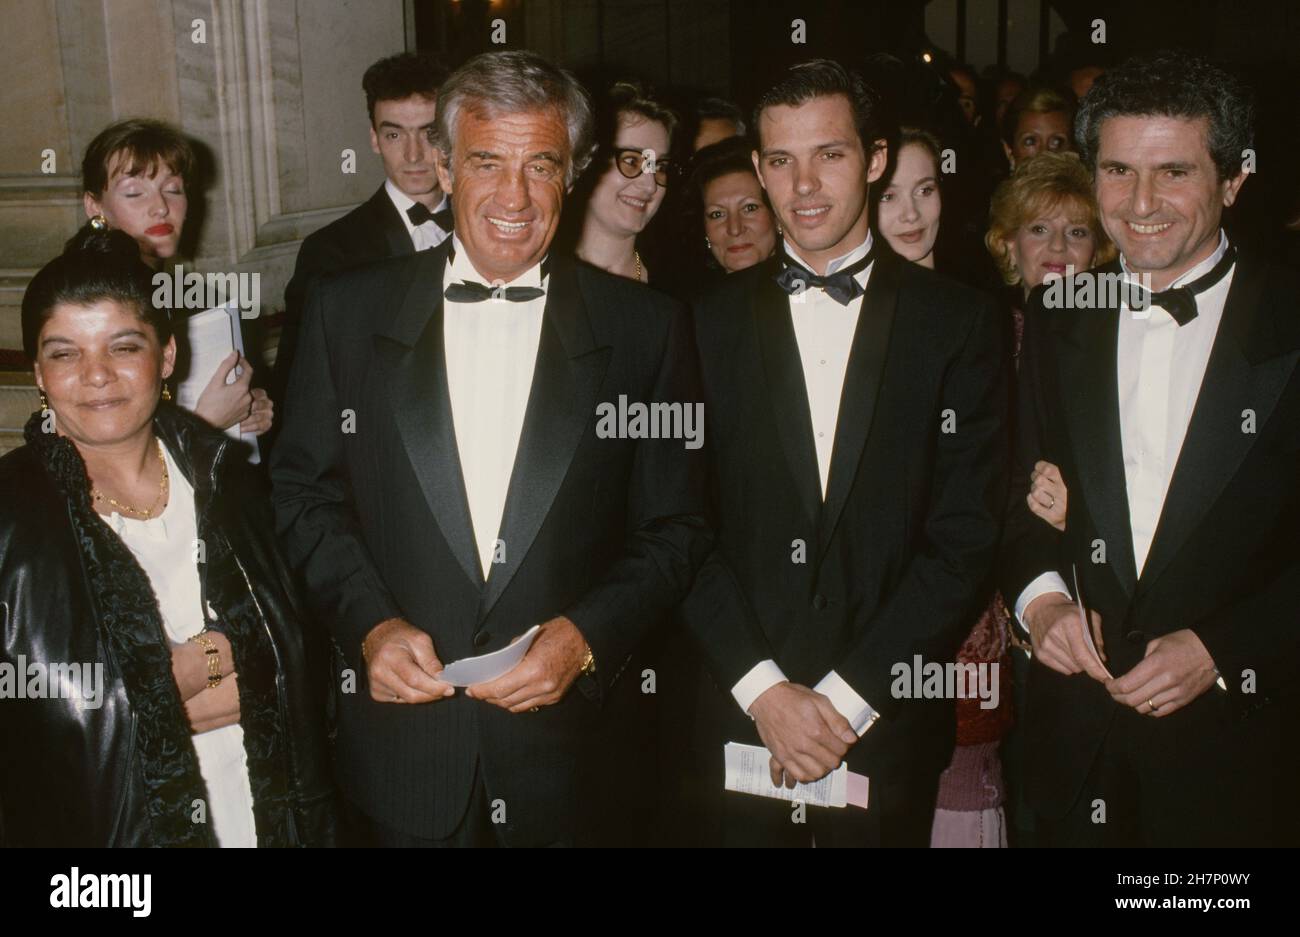 Jean-Paul Belmondo, his son Paul, and Claude Lelouch arriving at a gala  evening at the Opéra Garnier in Paris, on 26 April 1989 Stock Photo - Alamy